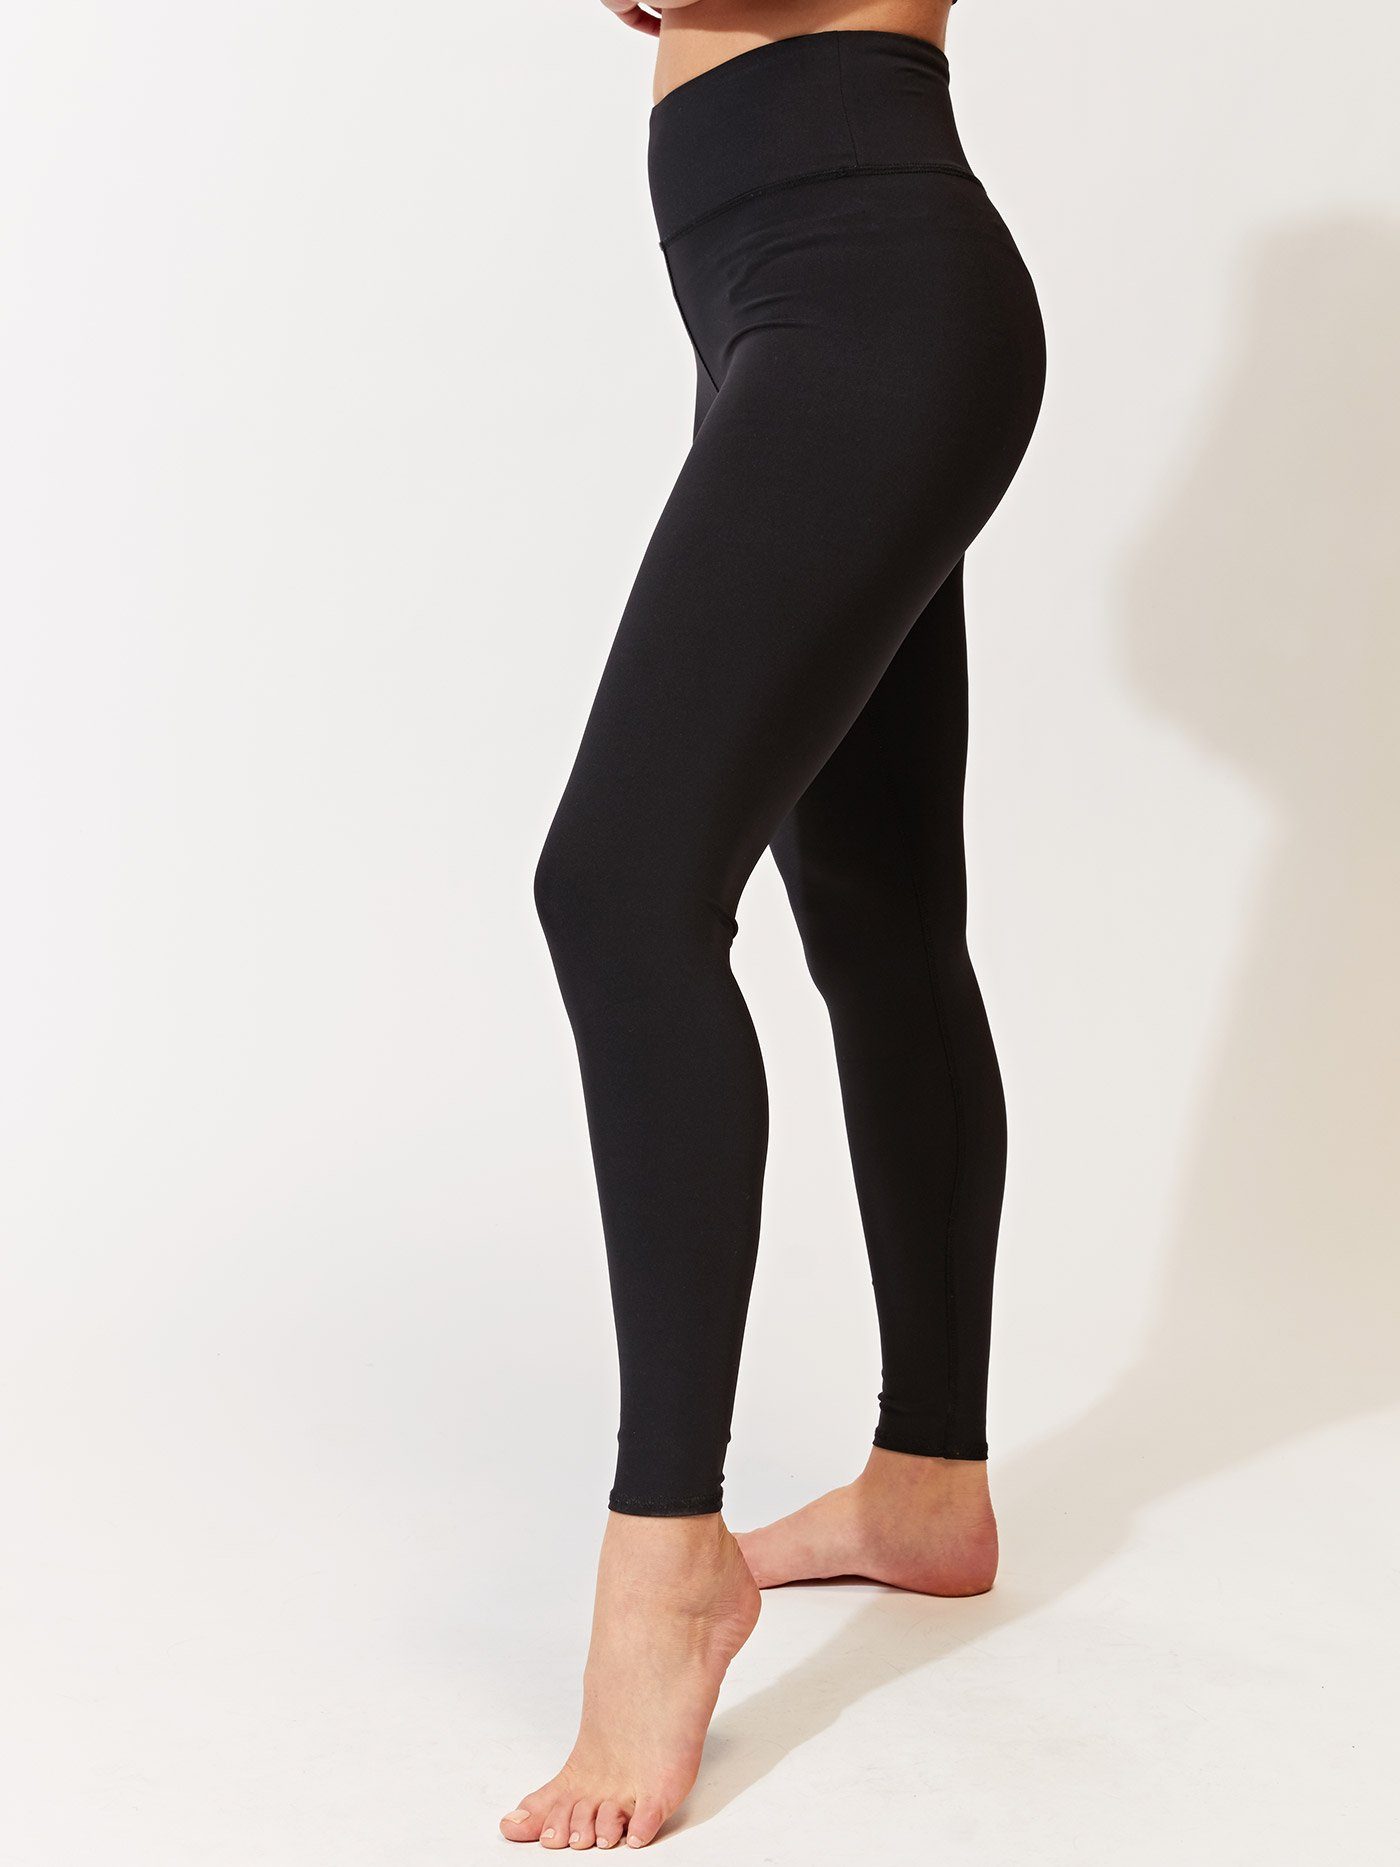 Spanx takes 50 percent off best-selling leggings for flash sale